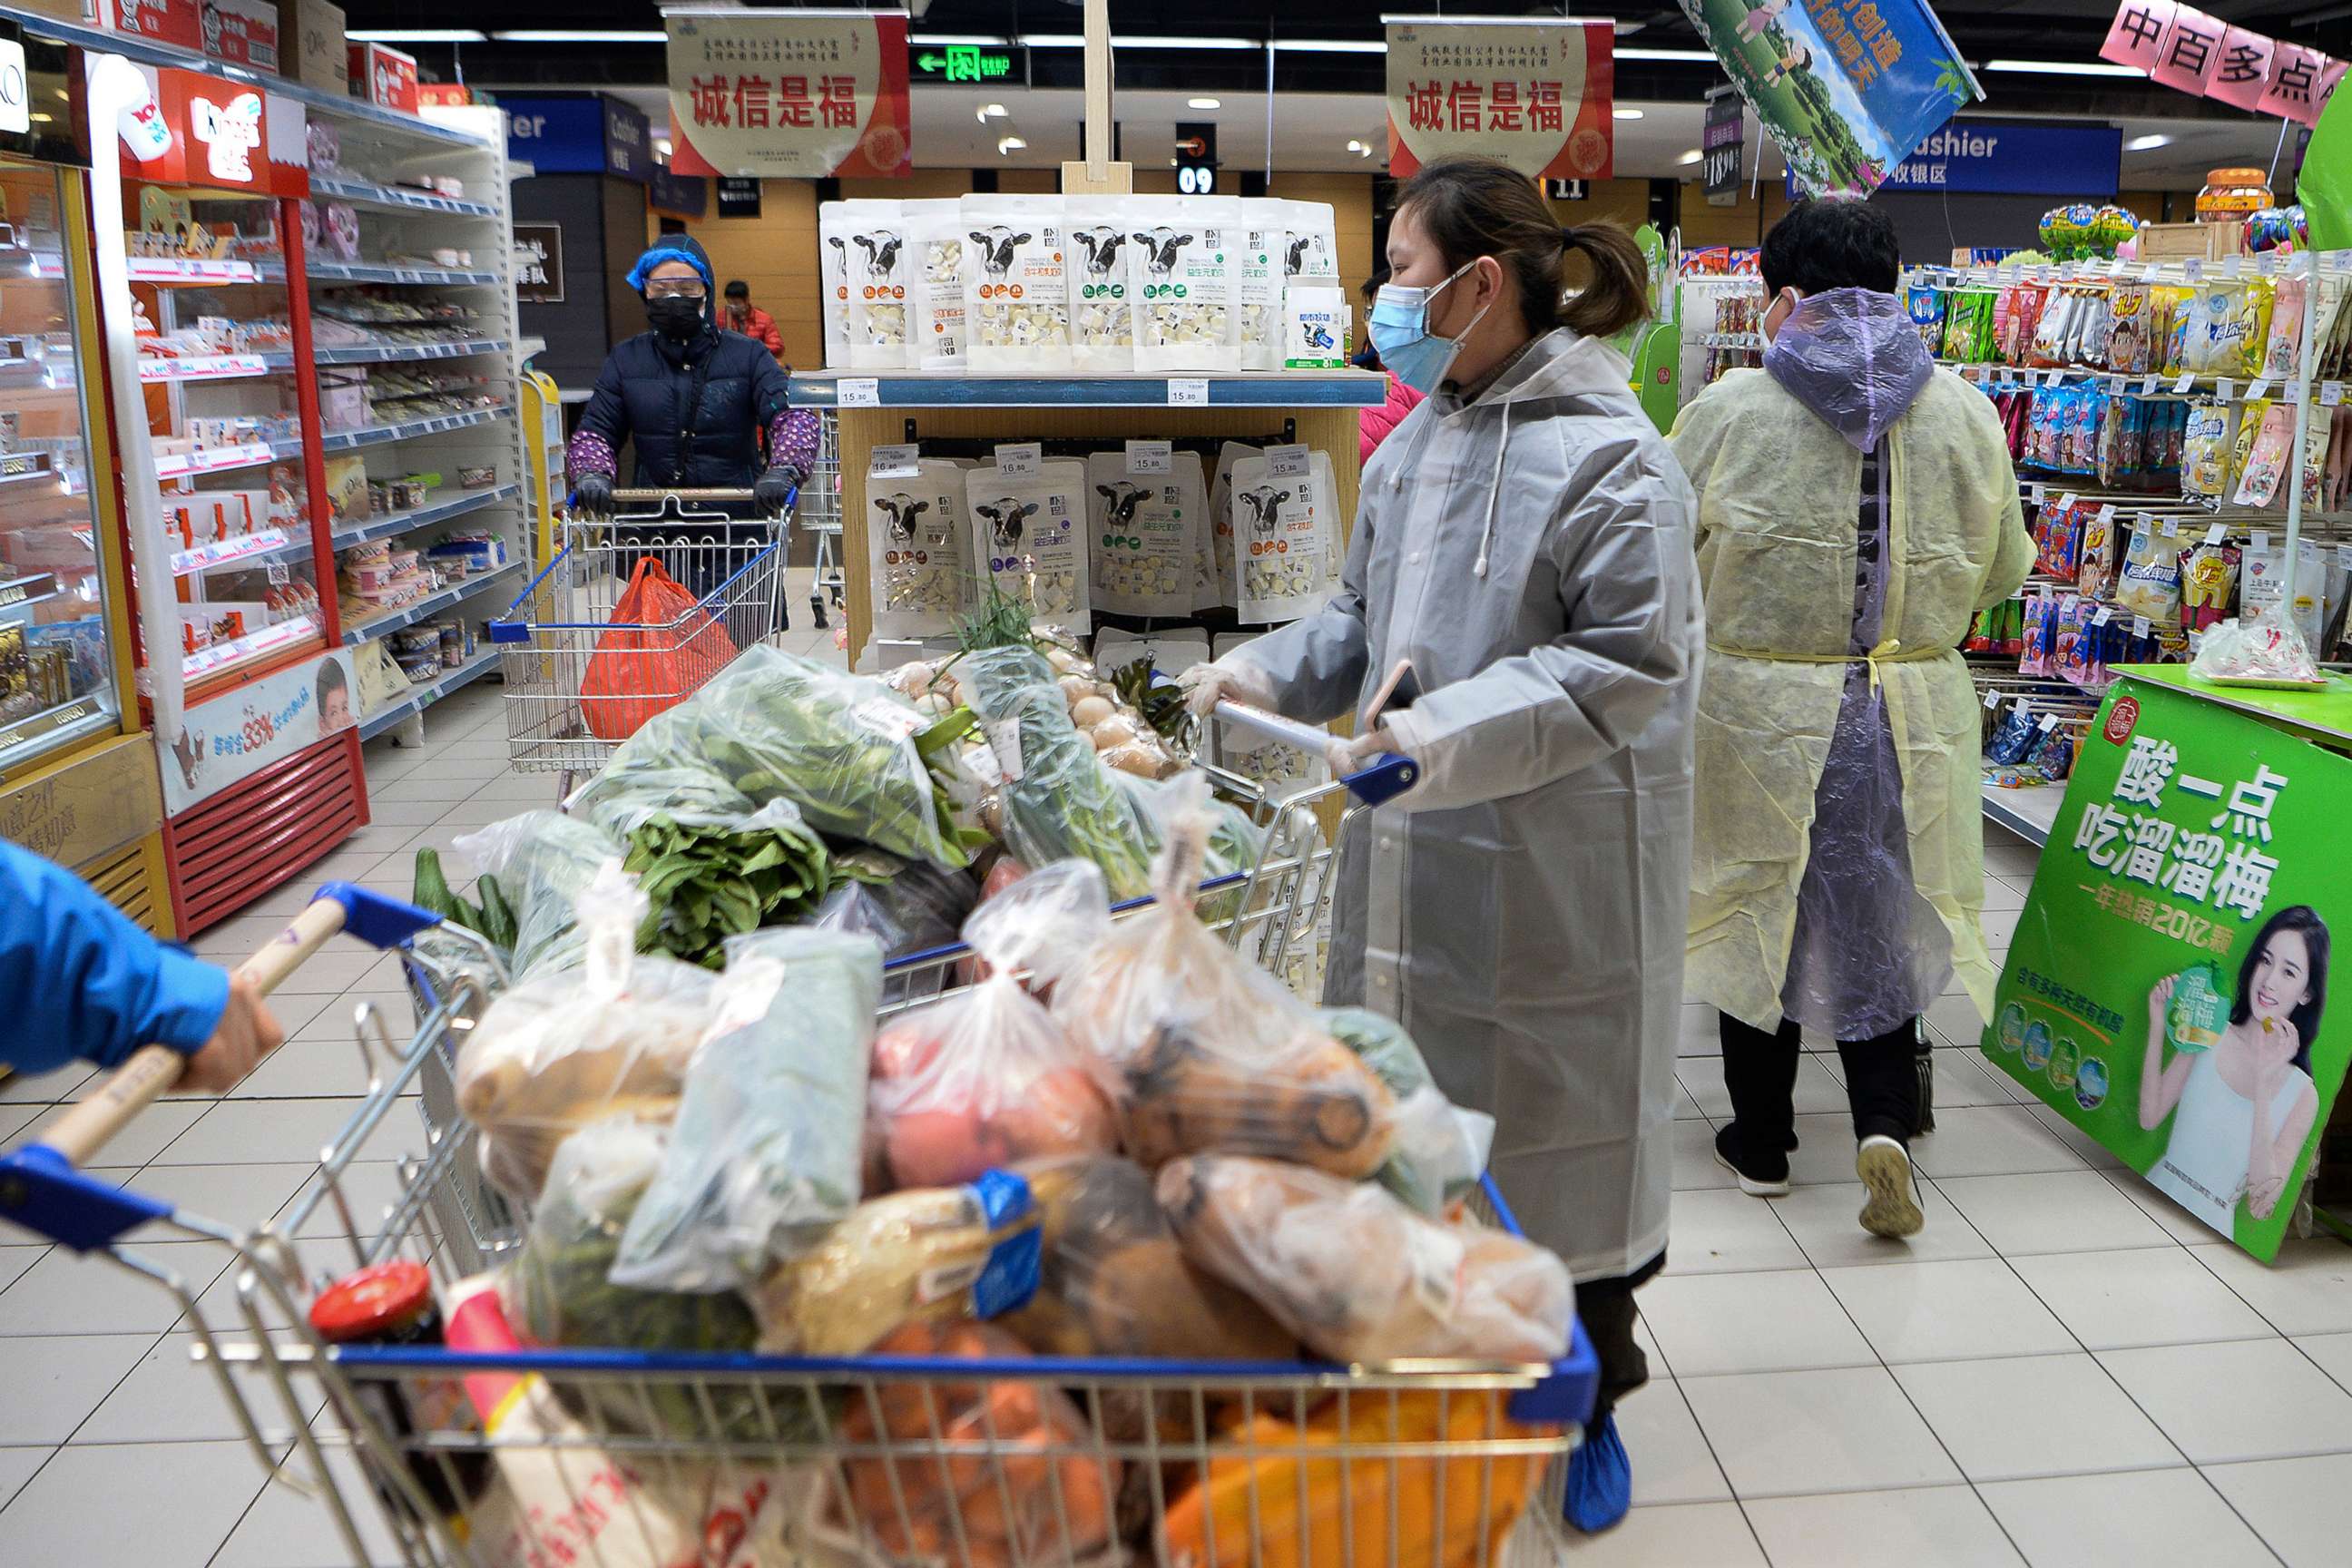 PHOTO: Women wearing protective face masks and raincoats buy foods at a supermarket in Wuhan in central China's Hubei province, Feb. 10, 2020.